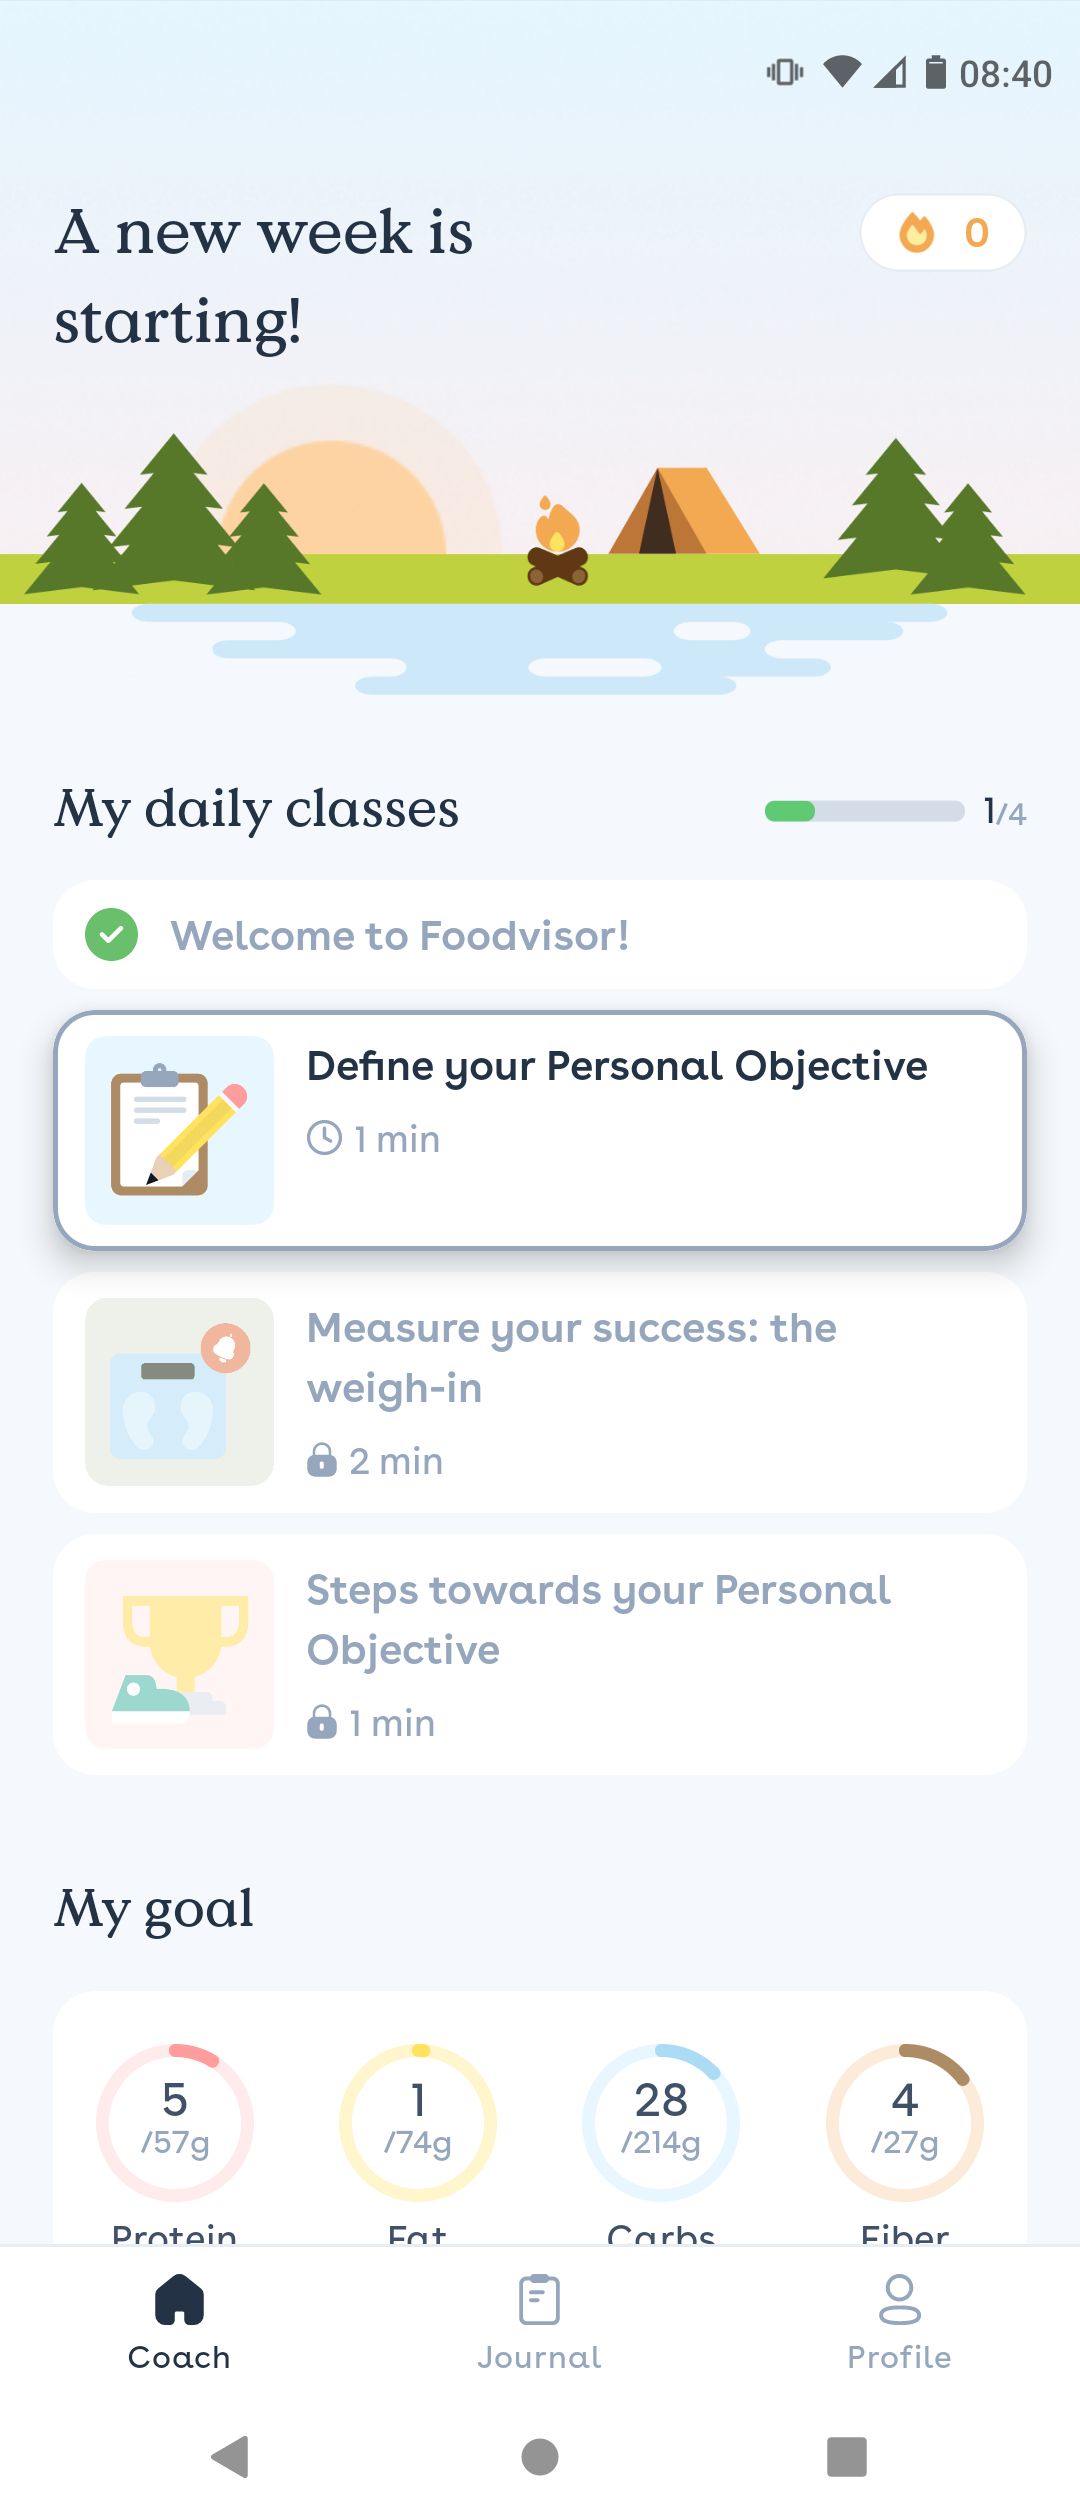 Nutrition Goals and Classes on Foodvisor App